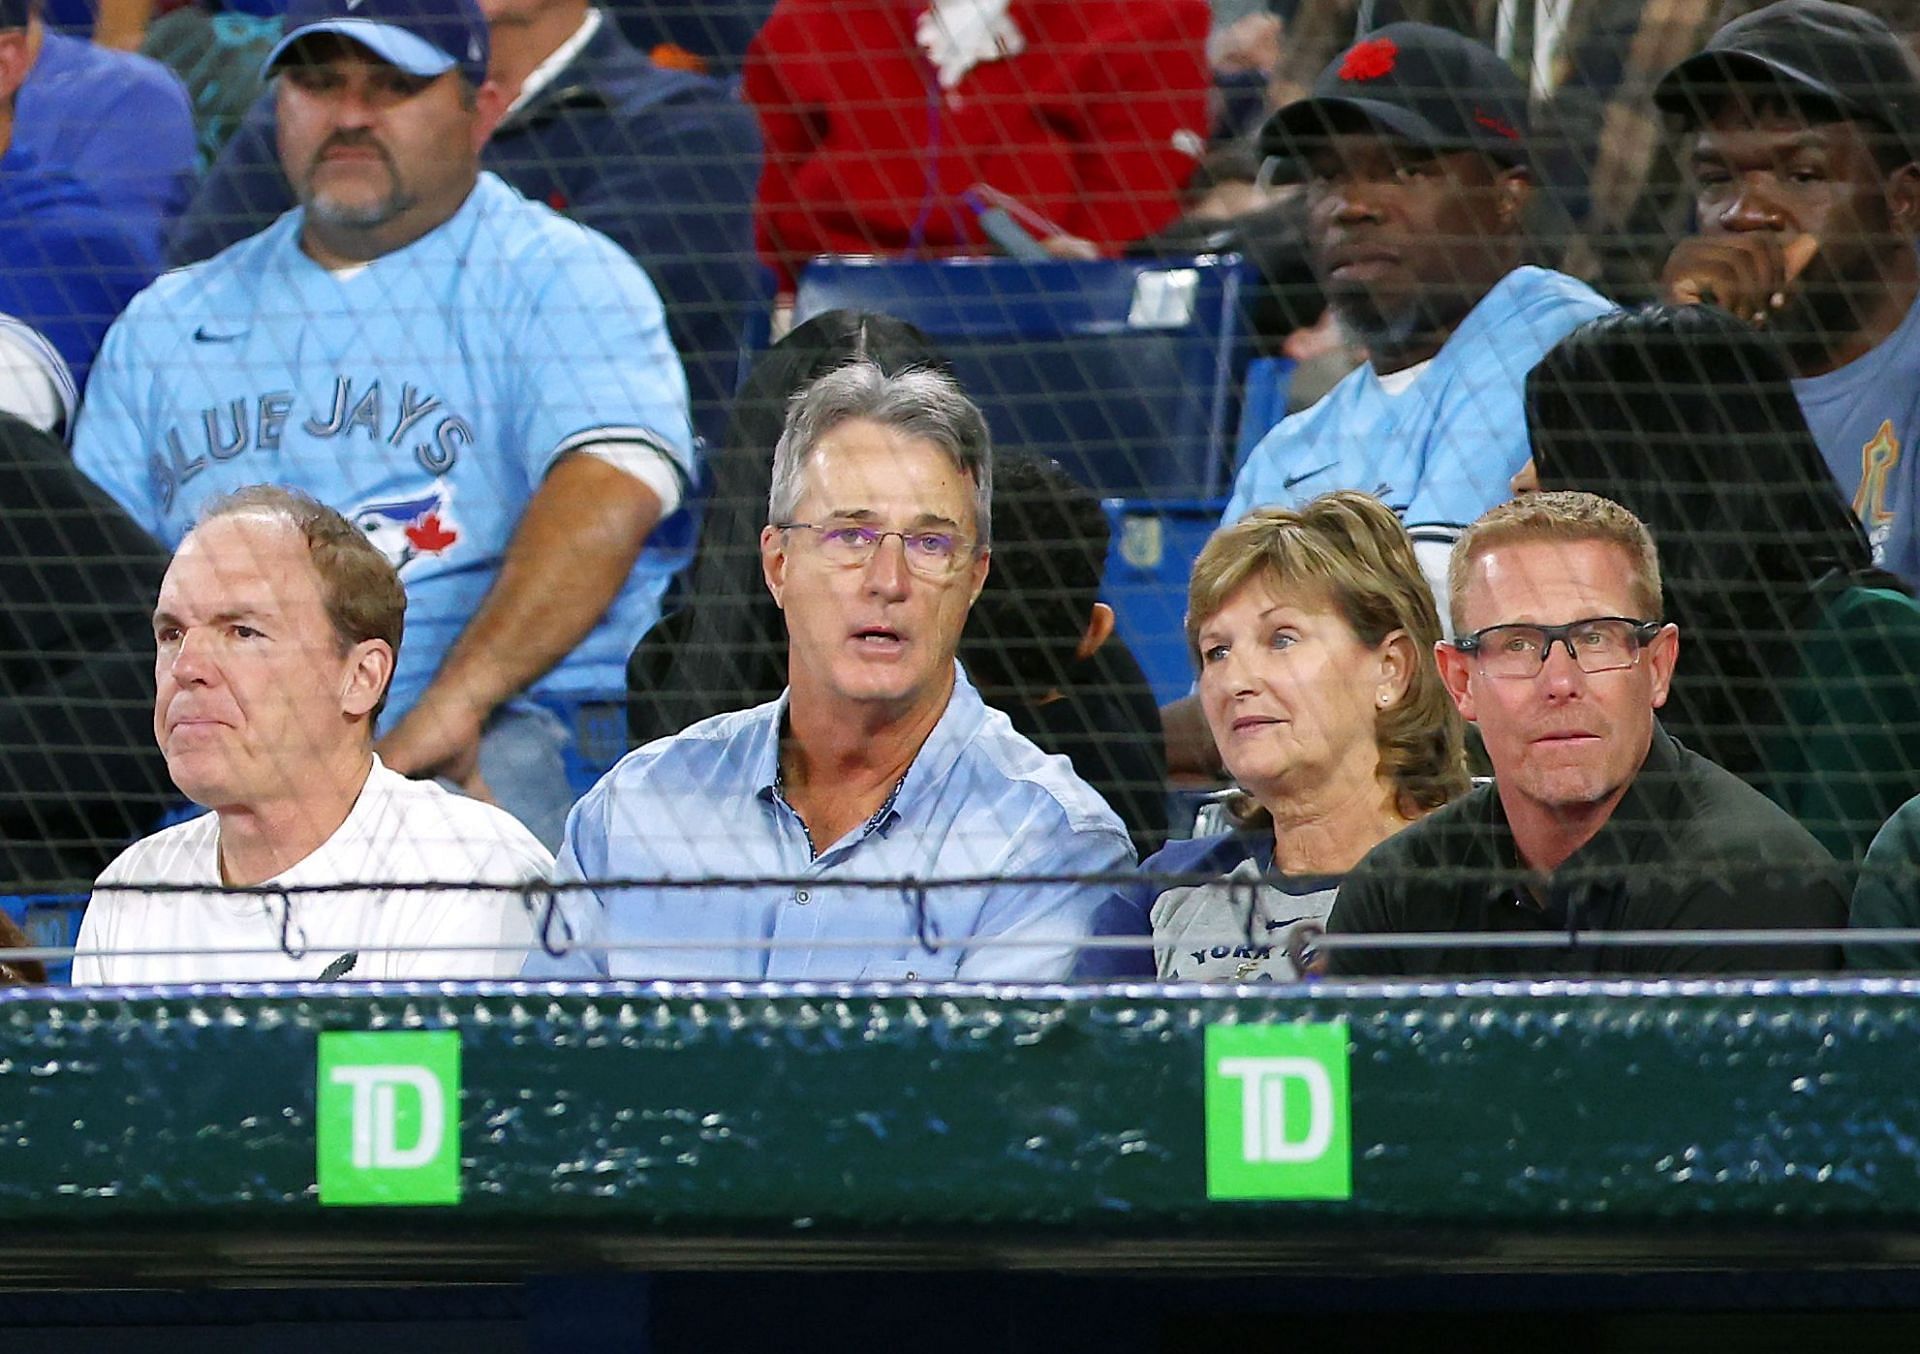 Roger Maris Jr., second from left, talks with with Patty Judge, second from right, the mother of New York Yankees slugger Aaron Judge during a game between the Yankees and the Toronto Blue Jays at Rogers Centre on Sept. 26 in Toronto, Ontario, Canada. (Photo by Vaughn Ridley/Getty Images)